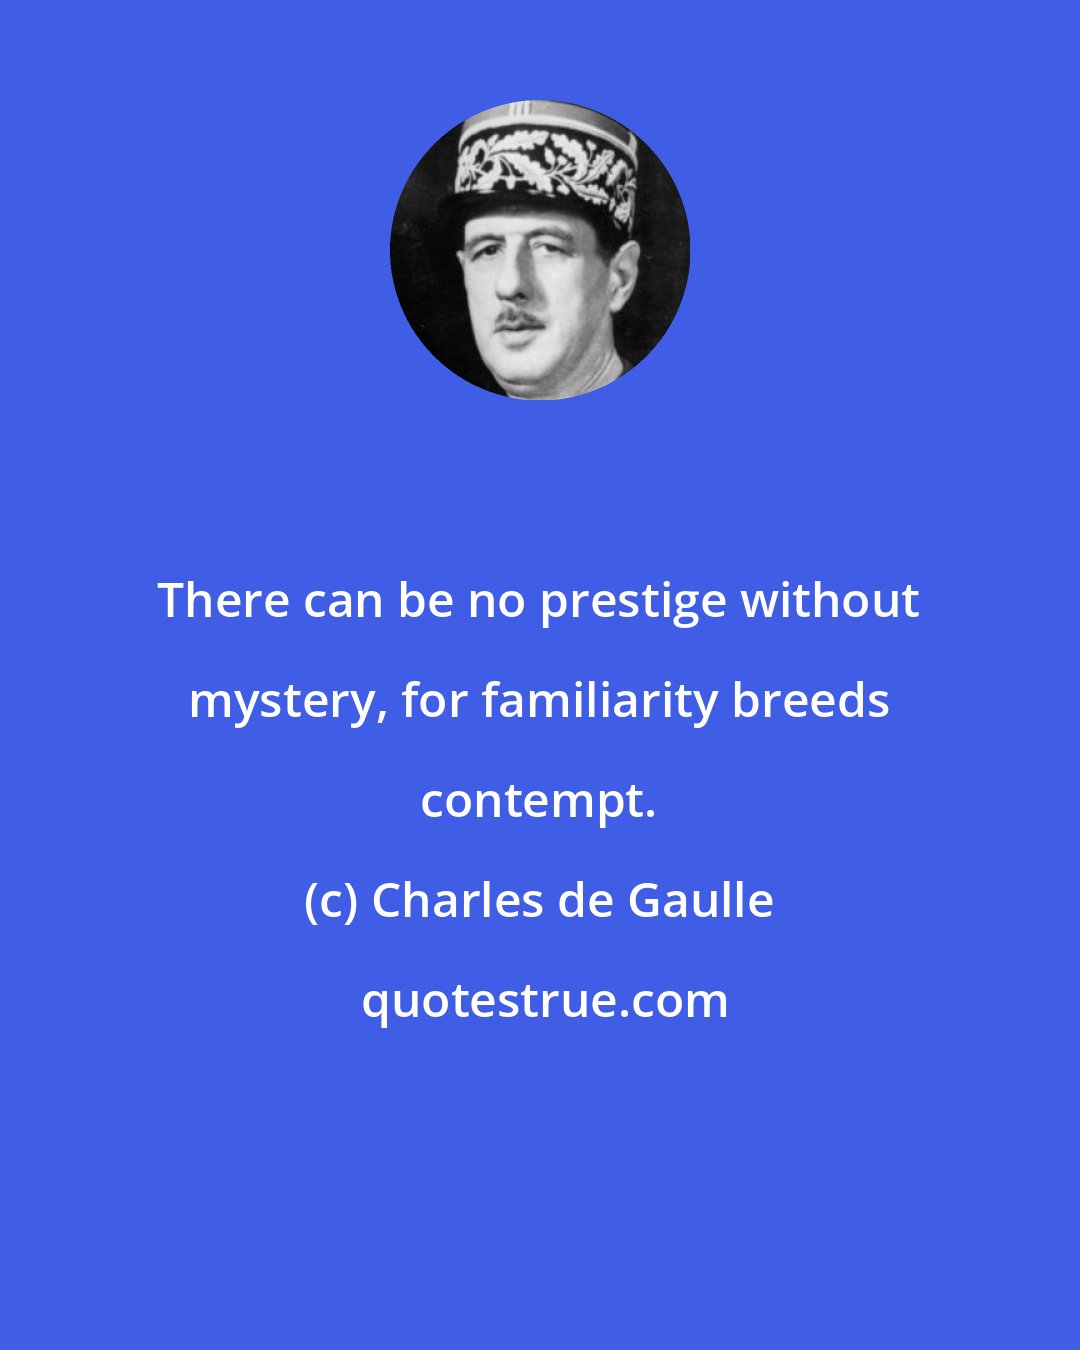 Charles de Gaulle: There can be no prestige without mystery, for familiarity breeds contempt.